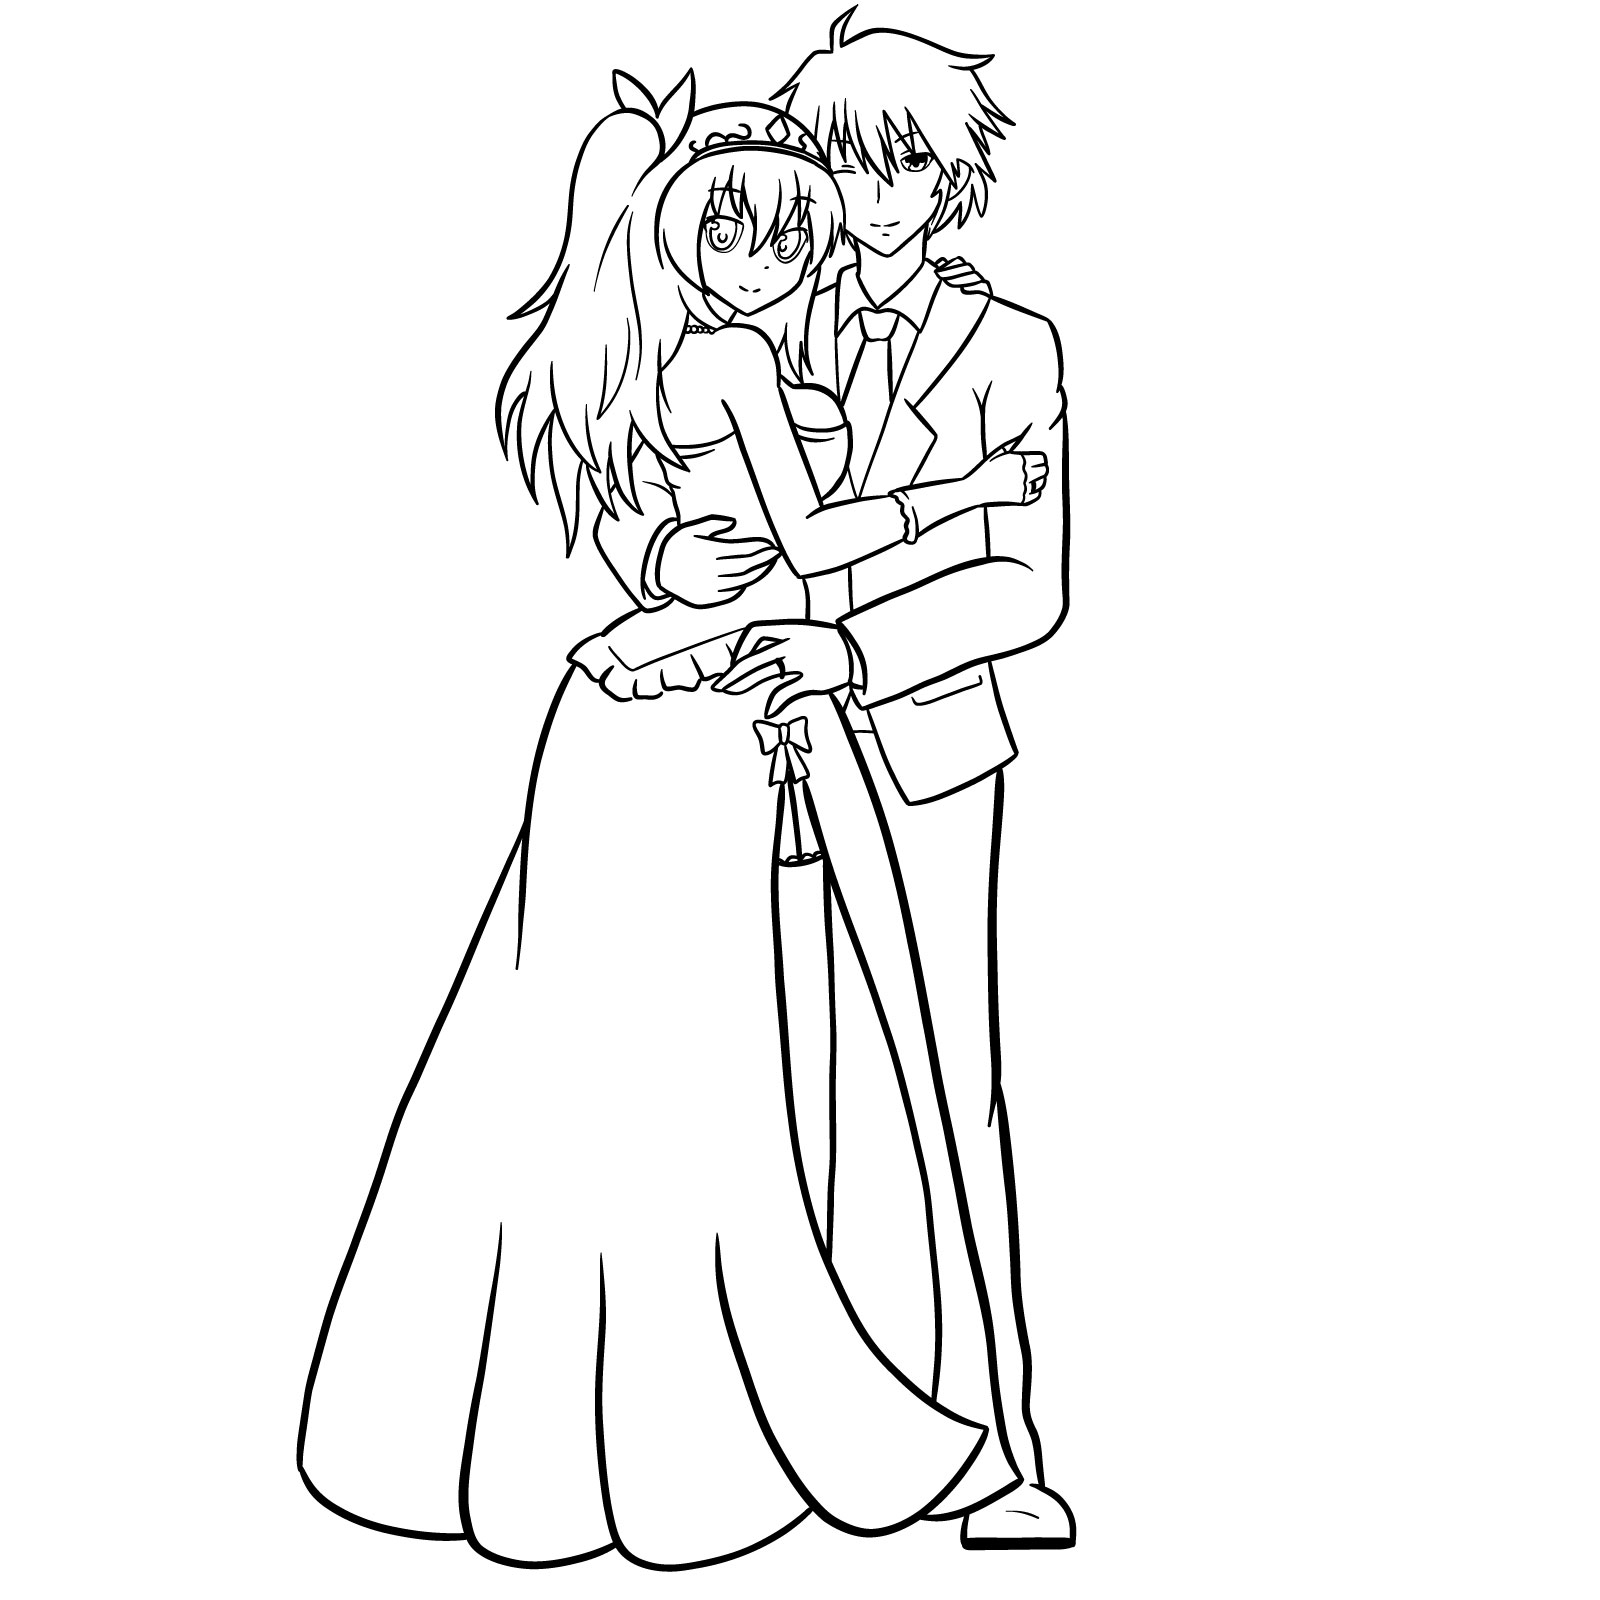 How to draw Ikki and Stella's wedding - coloring